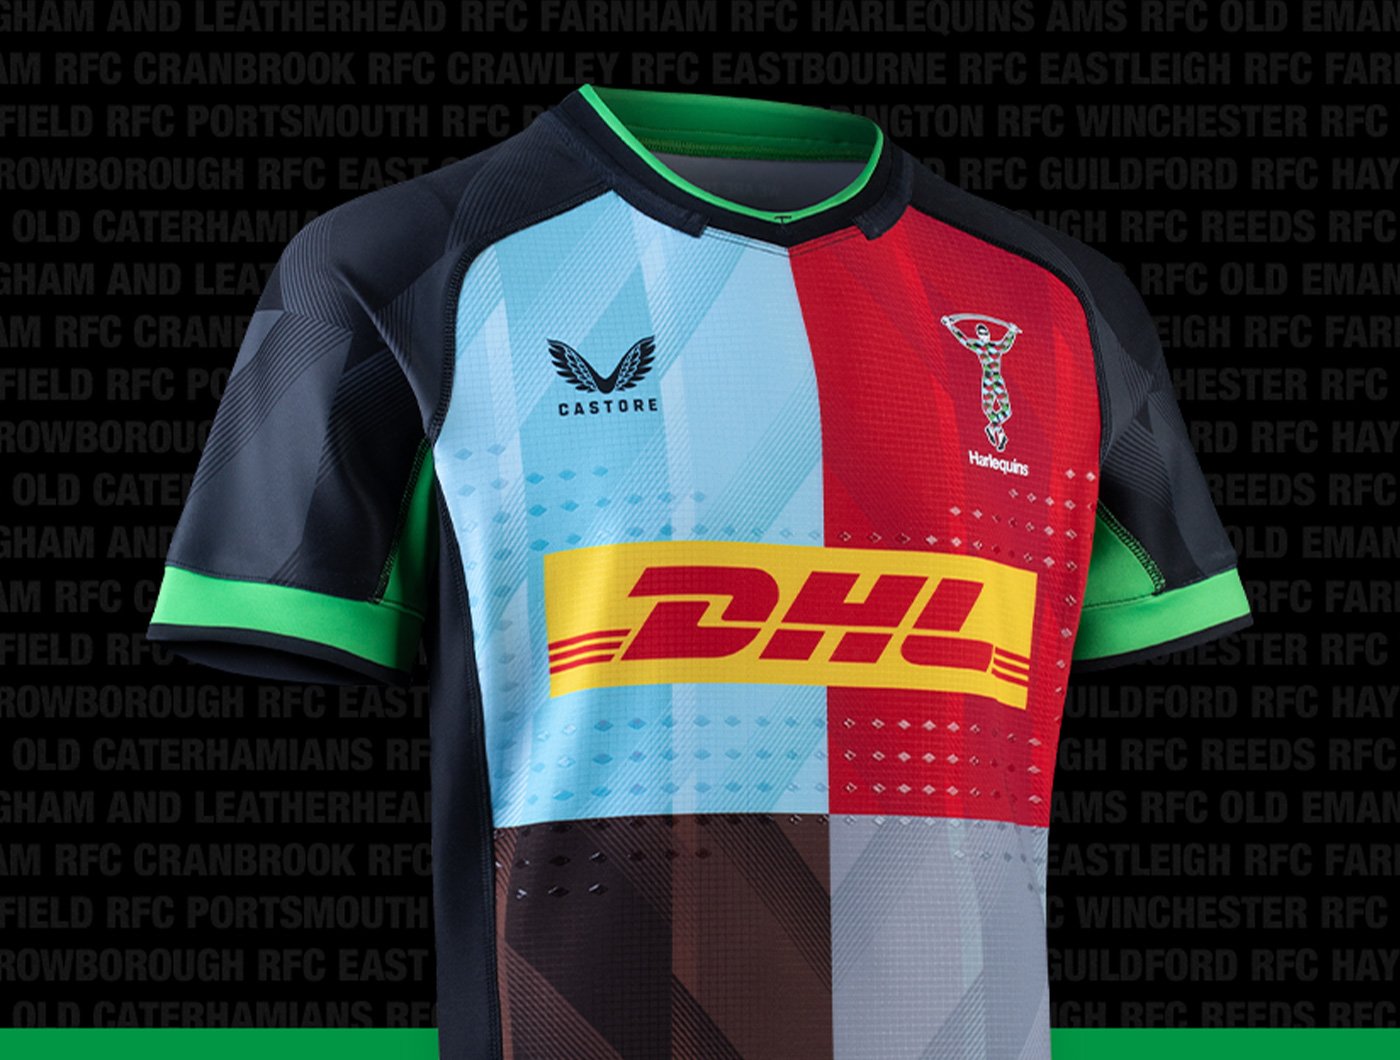 Official Club Rugby Shirts